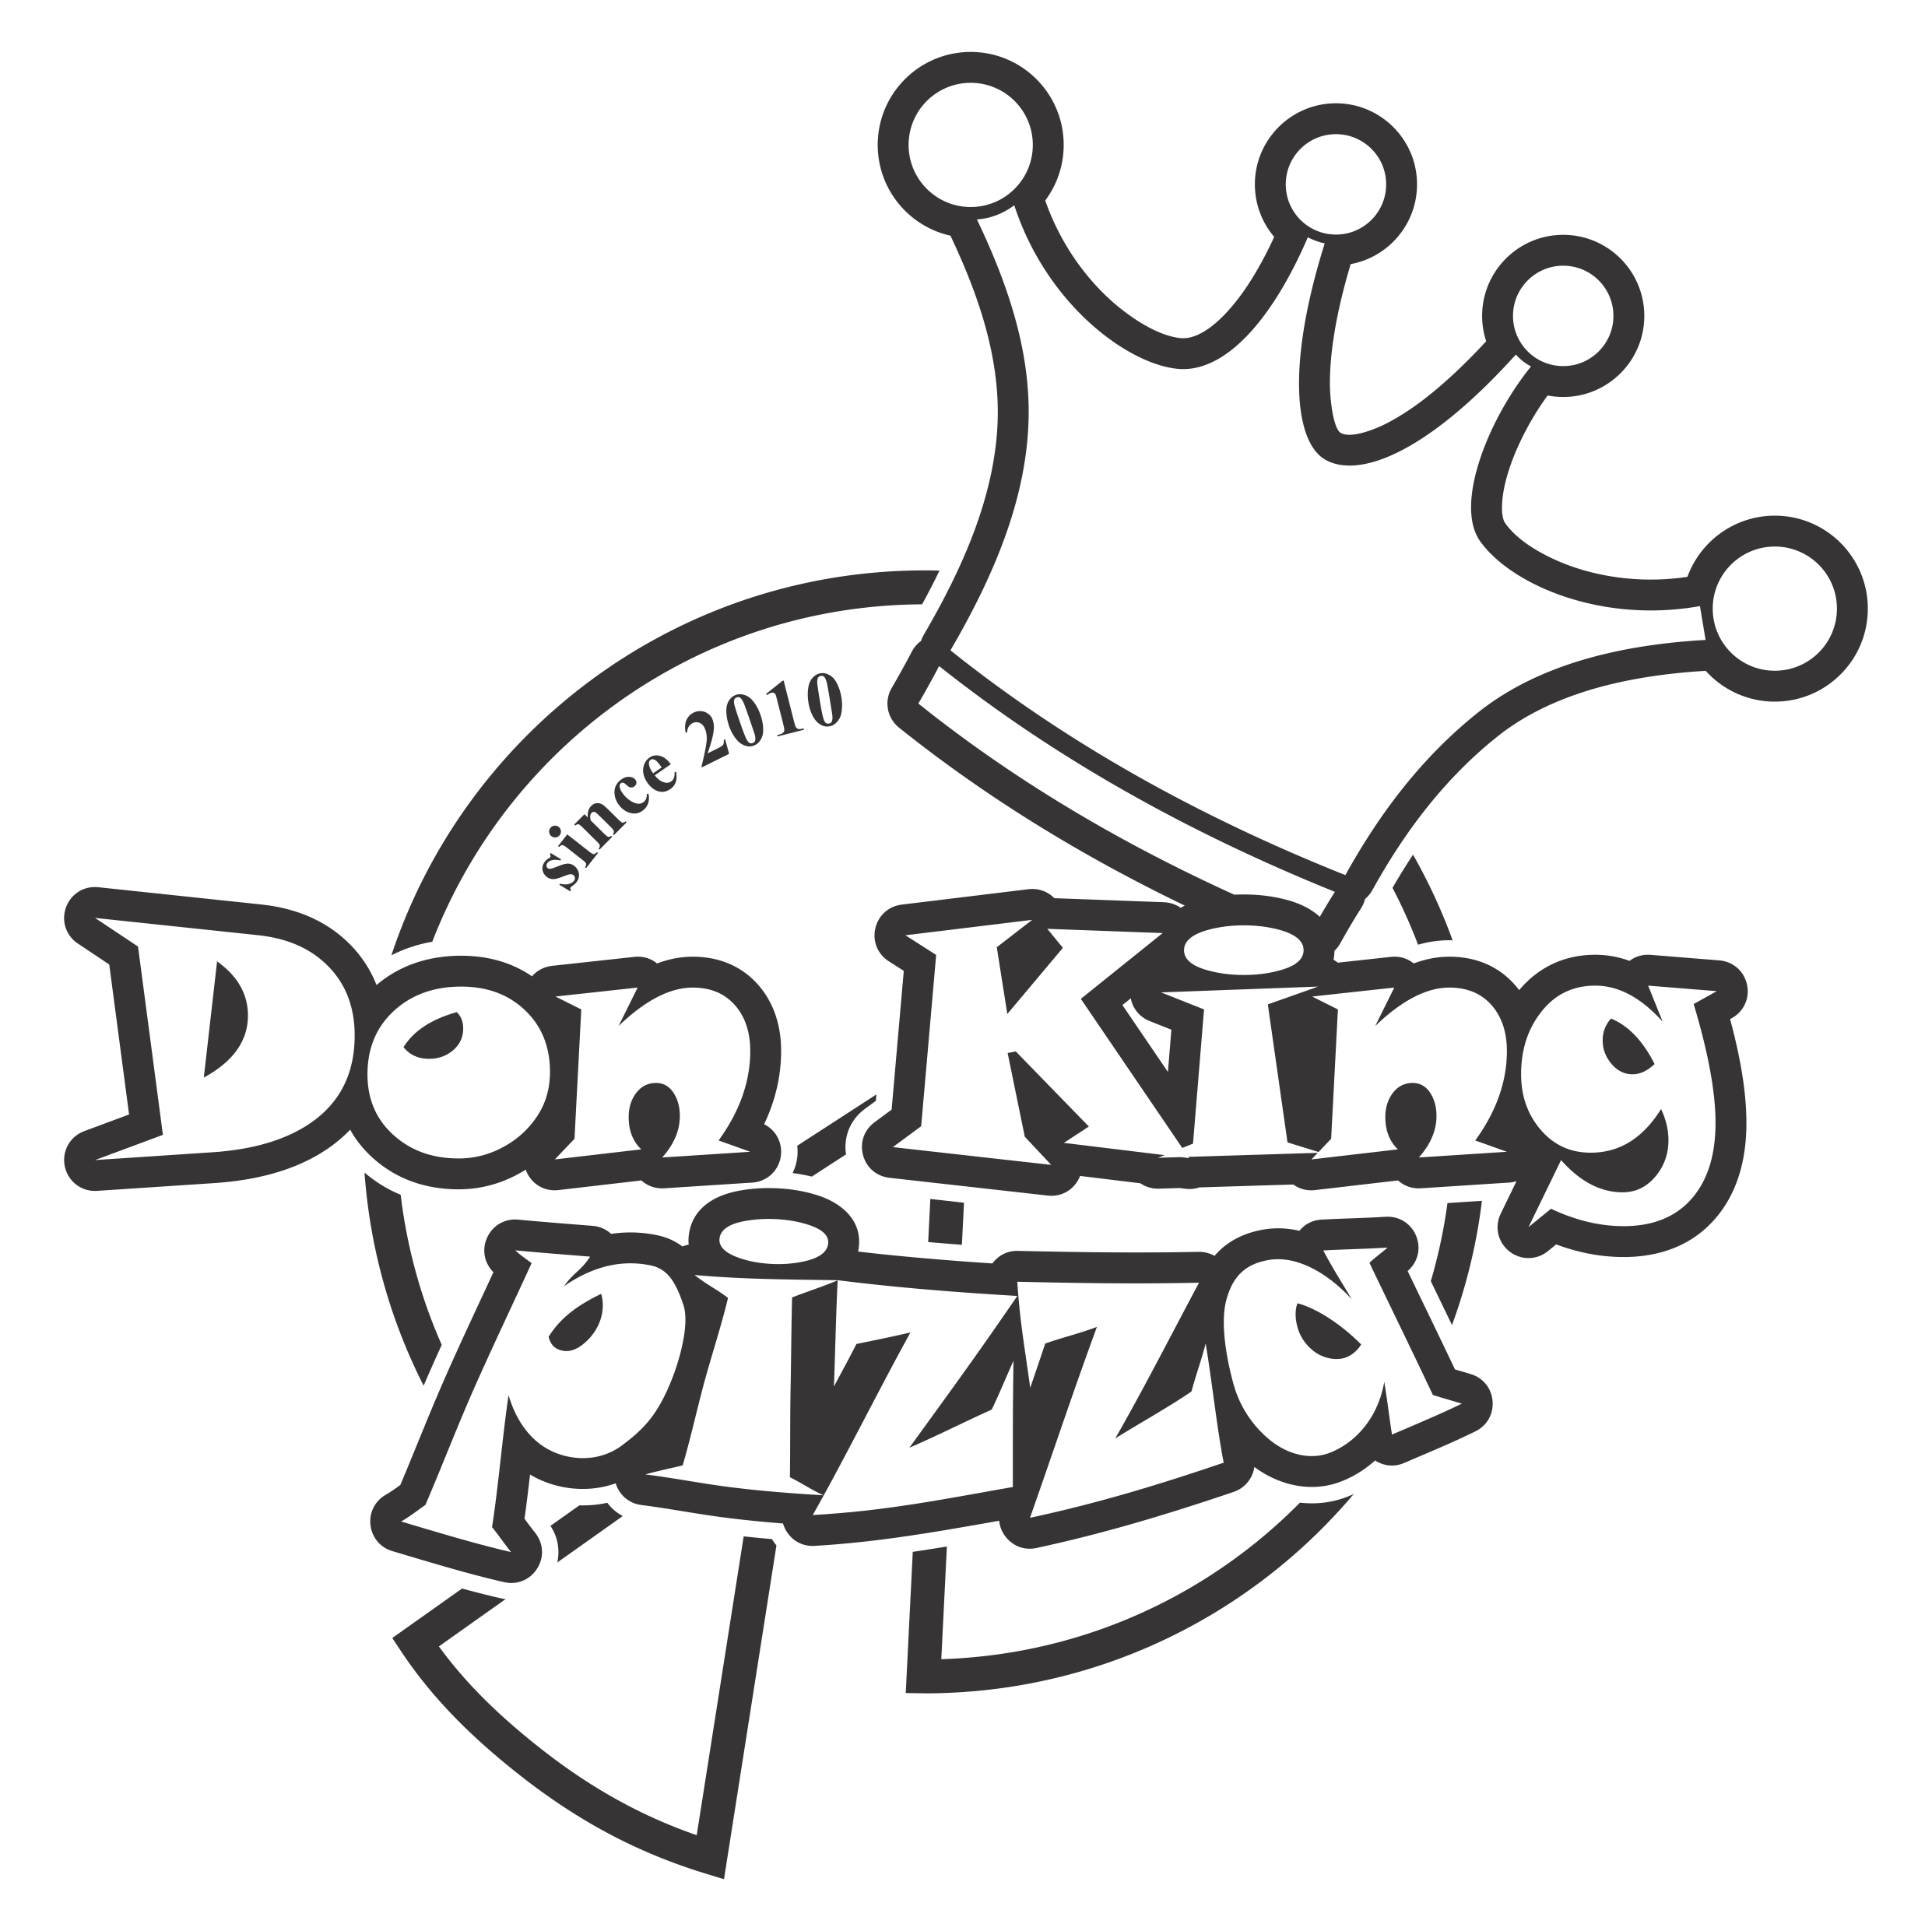 Don King Pizza